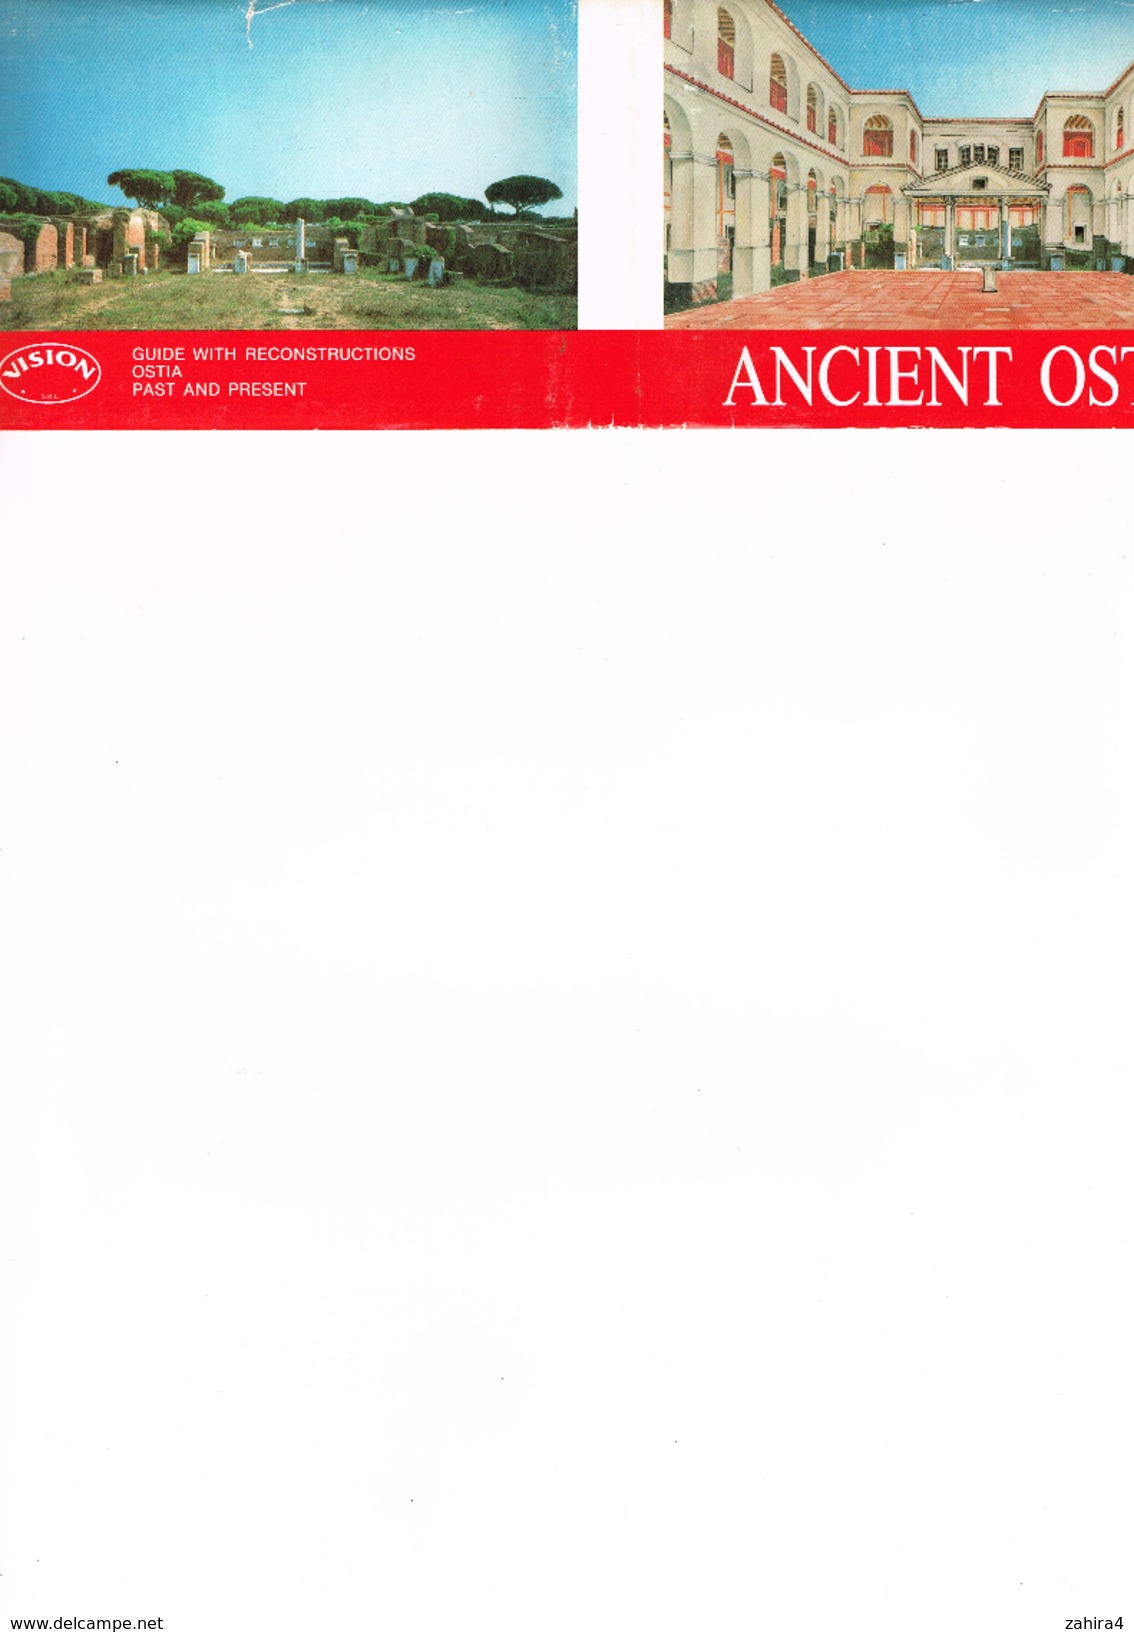 Ostia Past And Present Guide With Reconstruction Of Ancient Ostia Vision - Europe